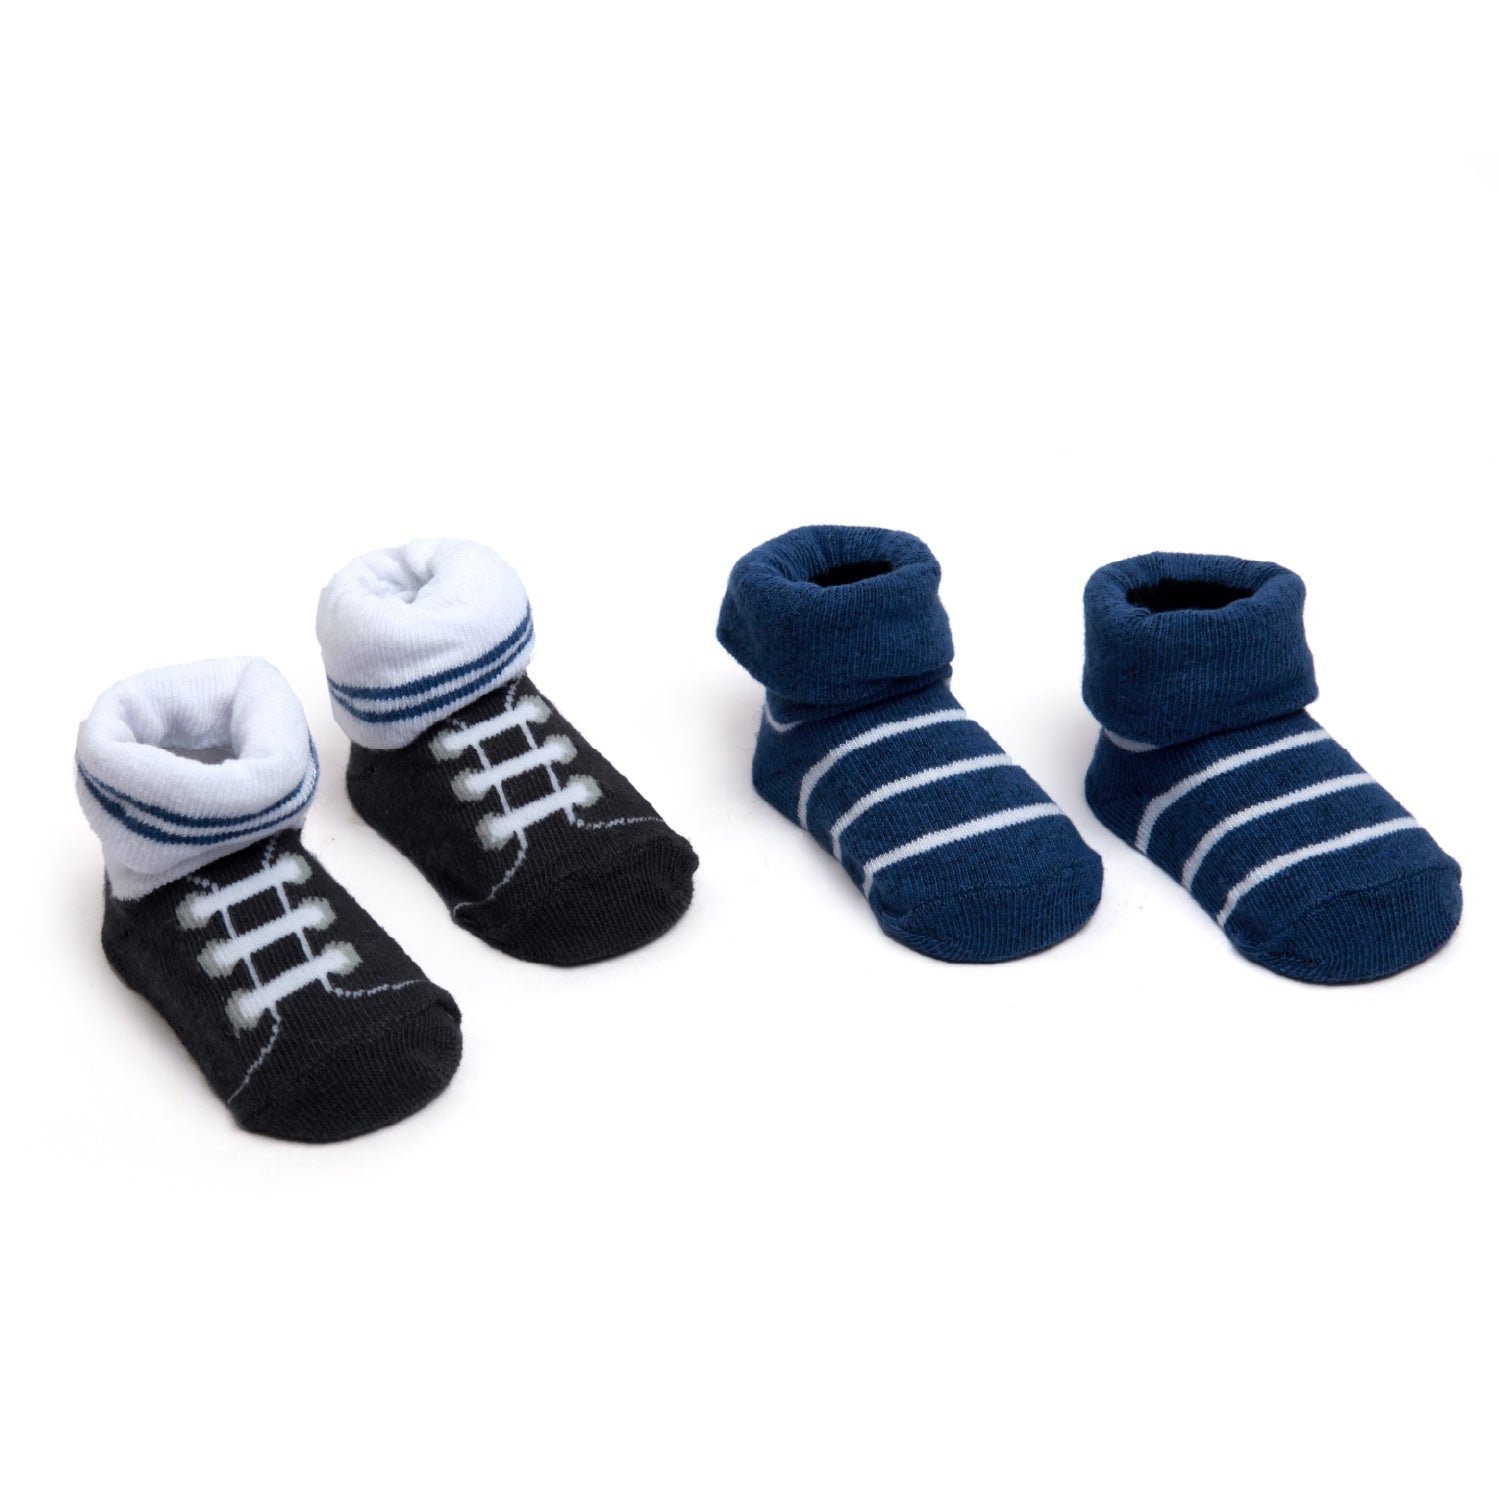 Driving In The Fast Lane Blue And White Set Of 3 Bibs And 2 Socks